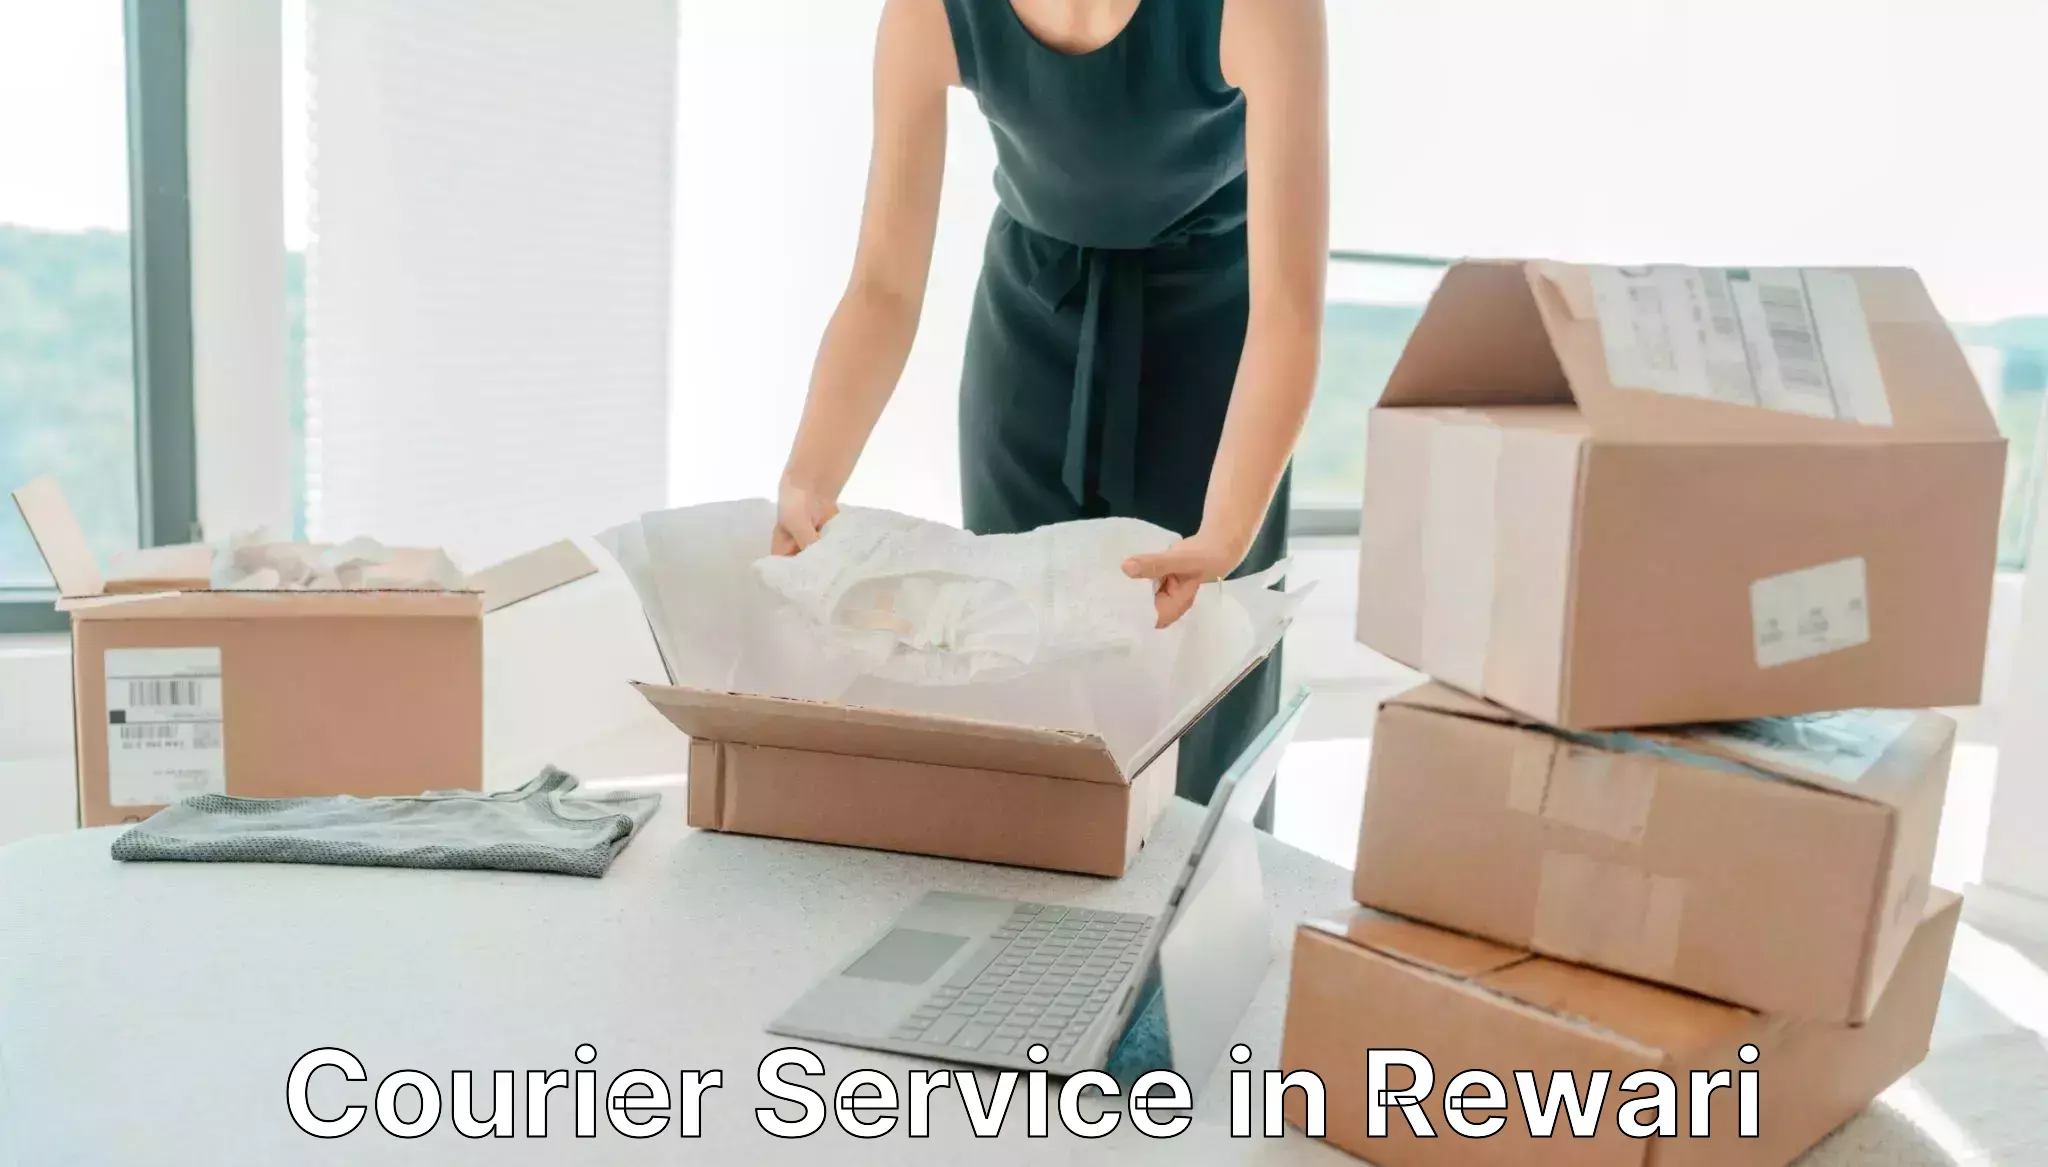 Small business couriers in Rewari